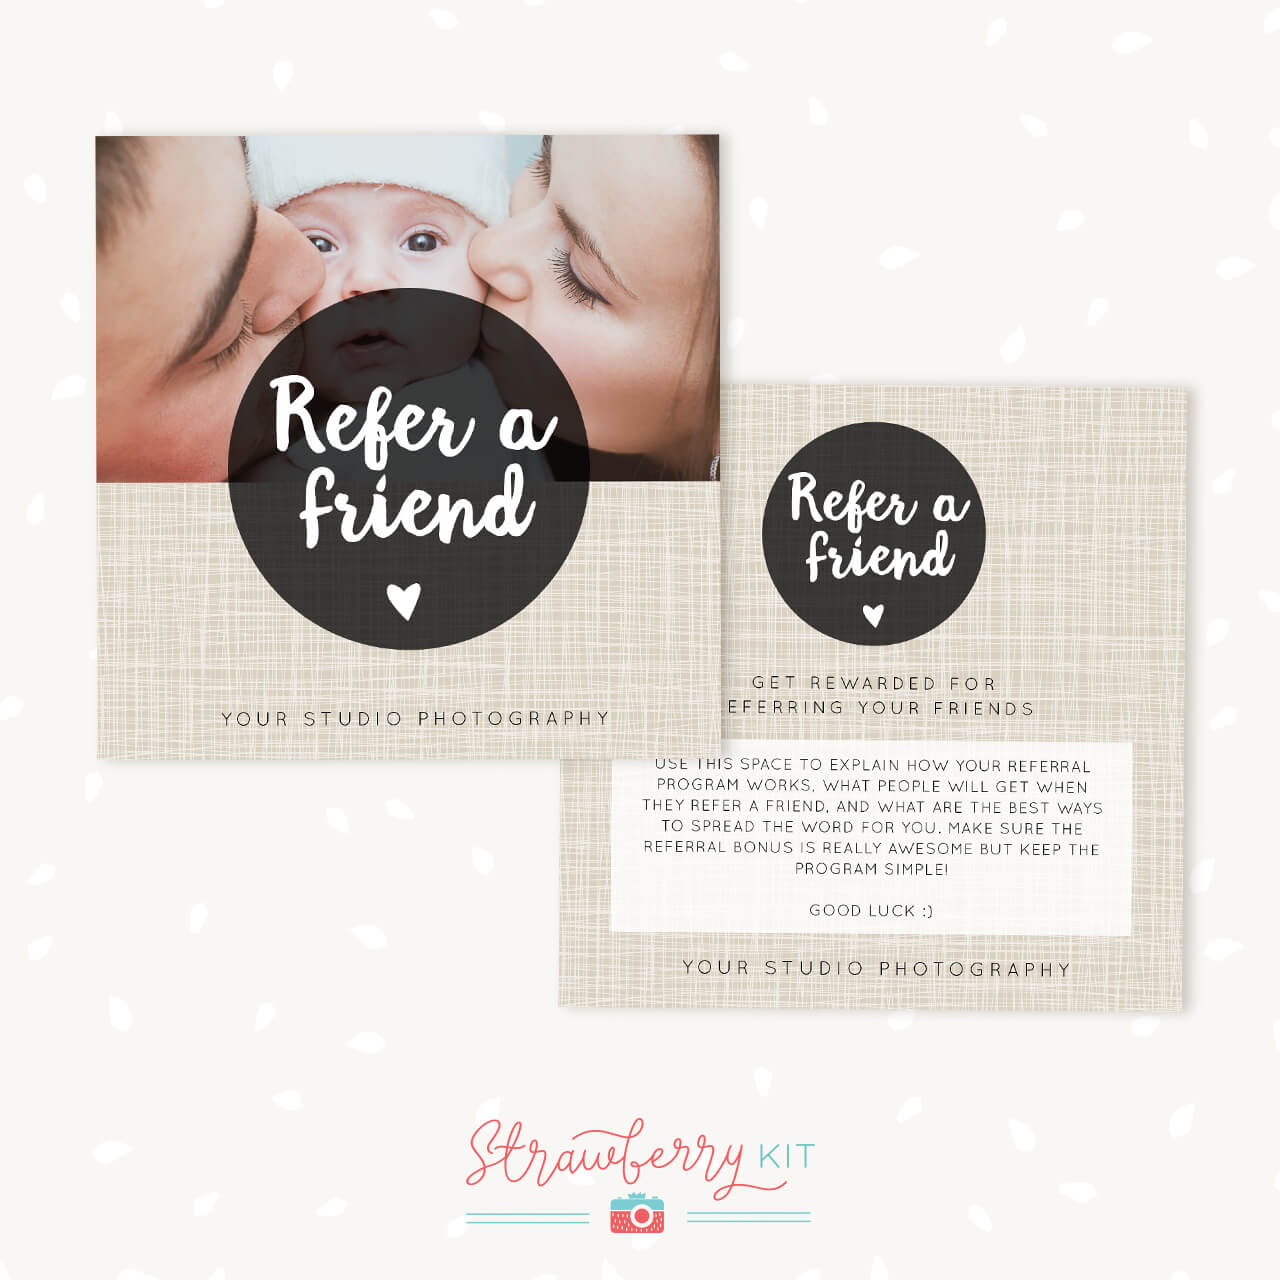 Referral Cards Photoshop Template – Strawberry Kit Intended For Photography Referral Card Templates